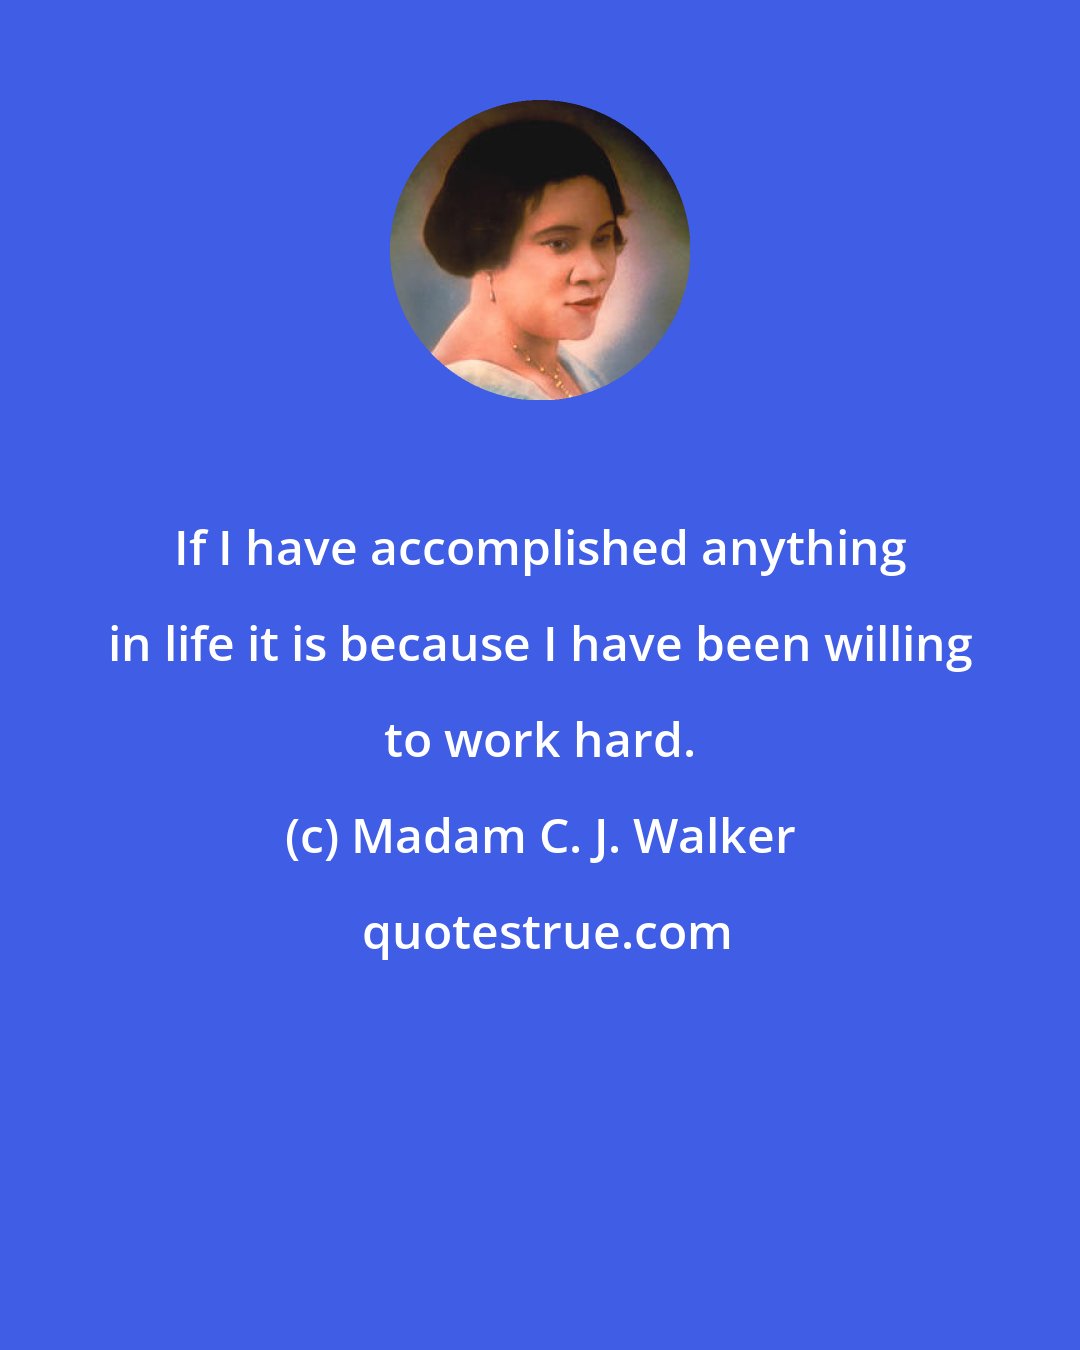 Madam C. J. Walker: If I have accomplished anything in life it is because I have been willing to work hard.